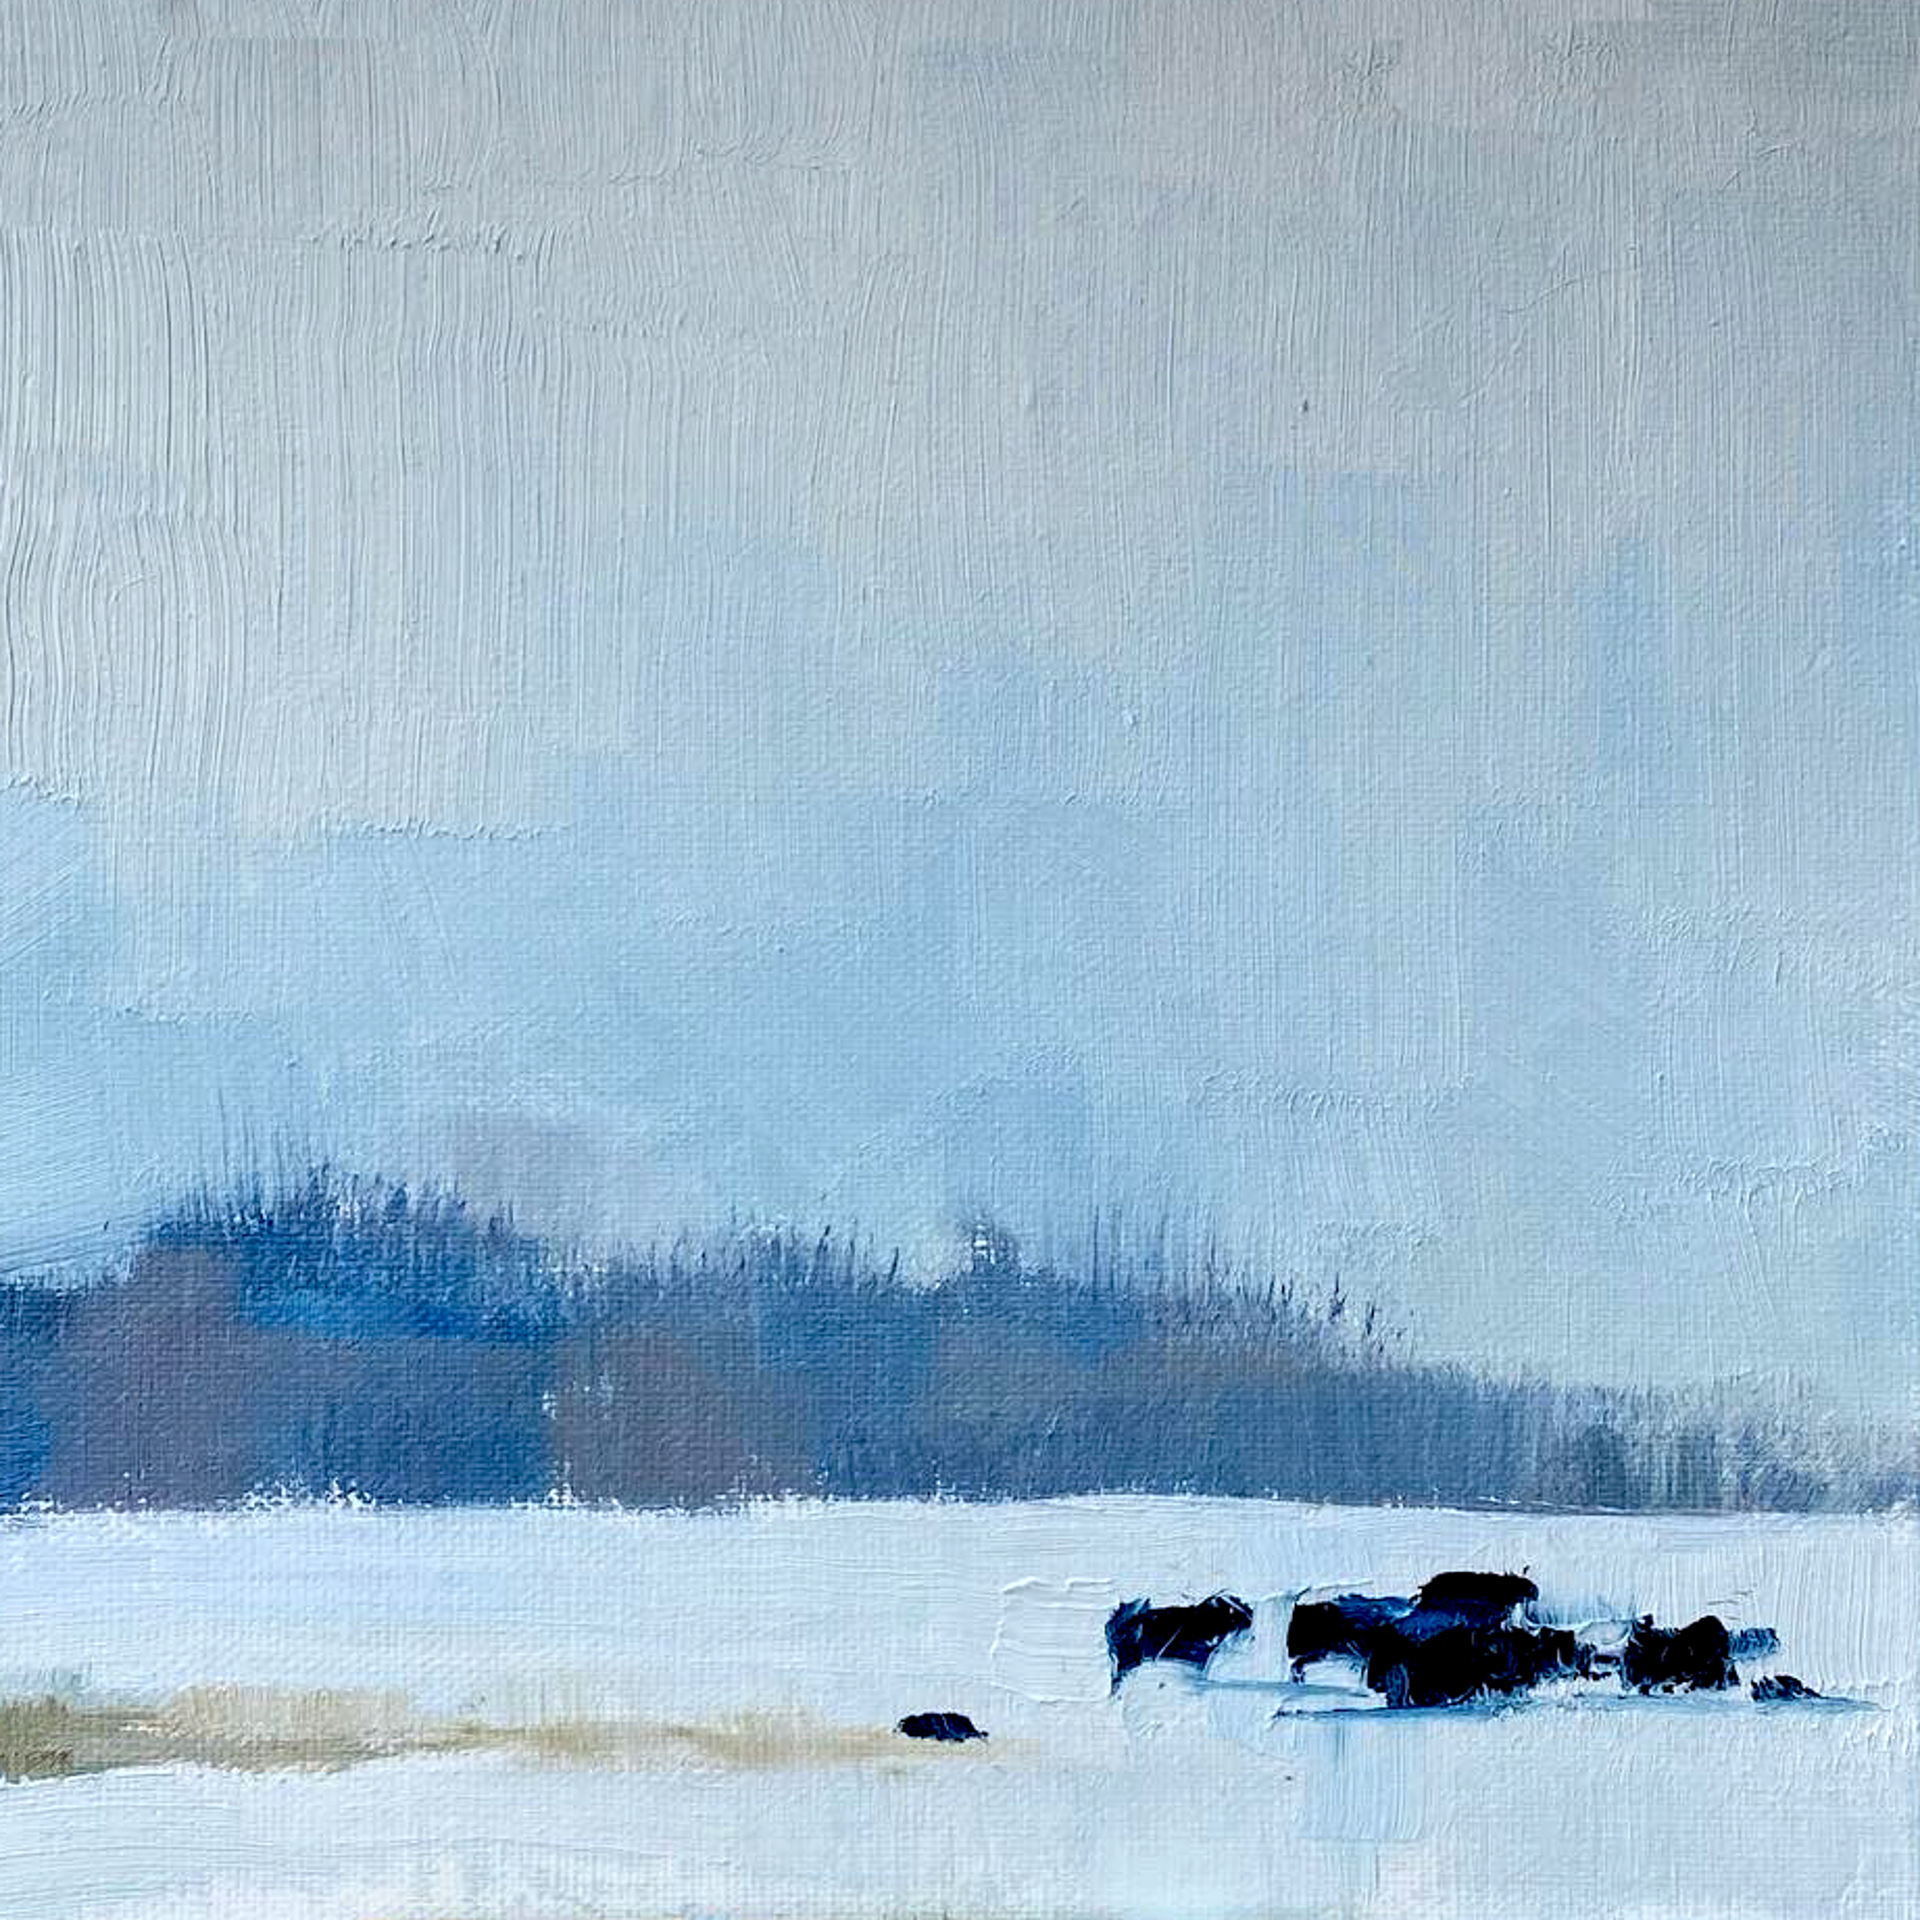 A Small Contemporary Abstract Oil Painting Of A Snow Covered Field With Black Cattle Gathered, By Amber Blazina, Available At Gallery Wild